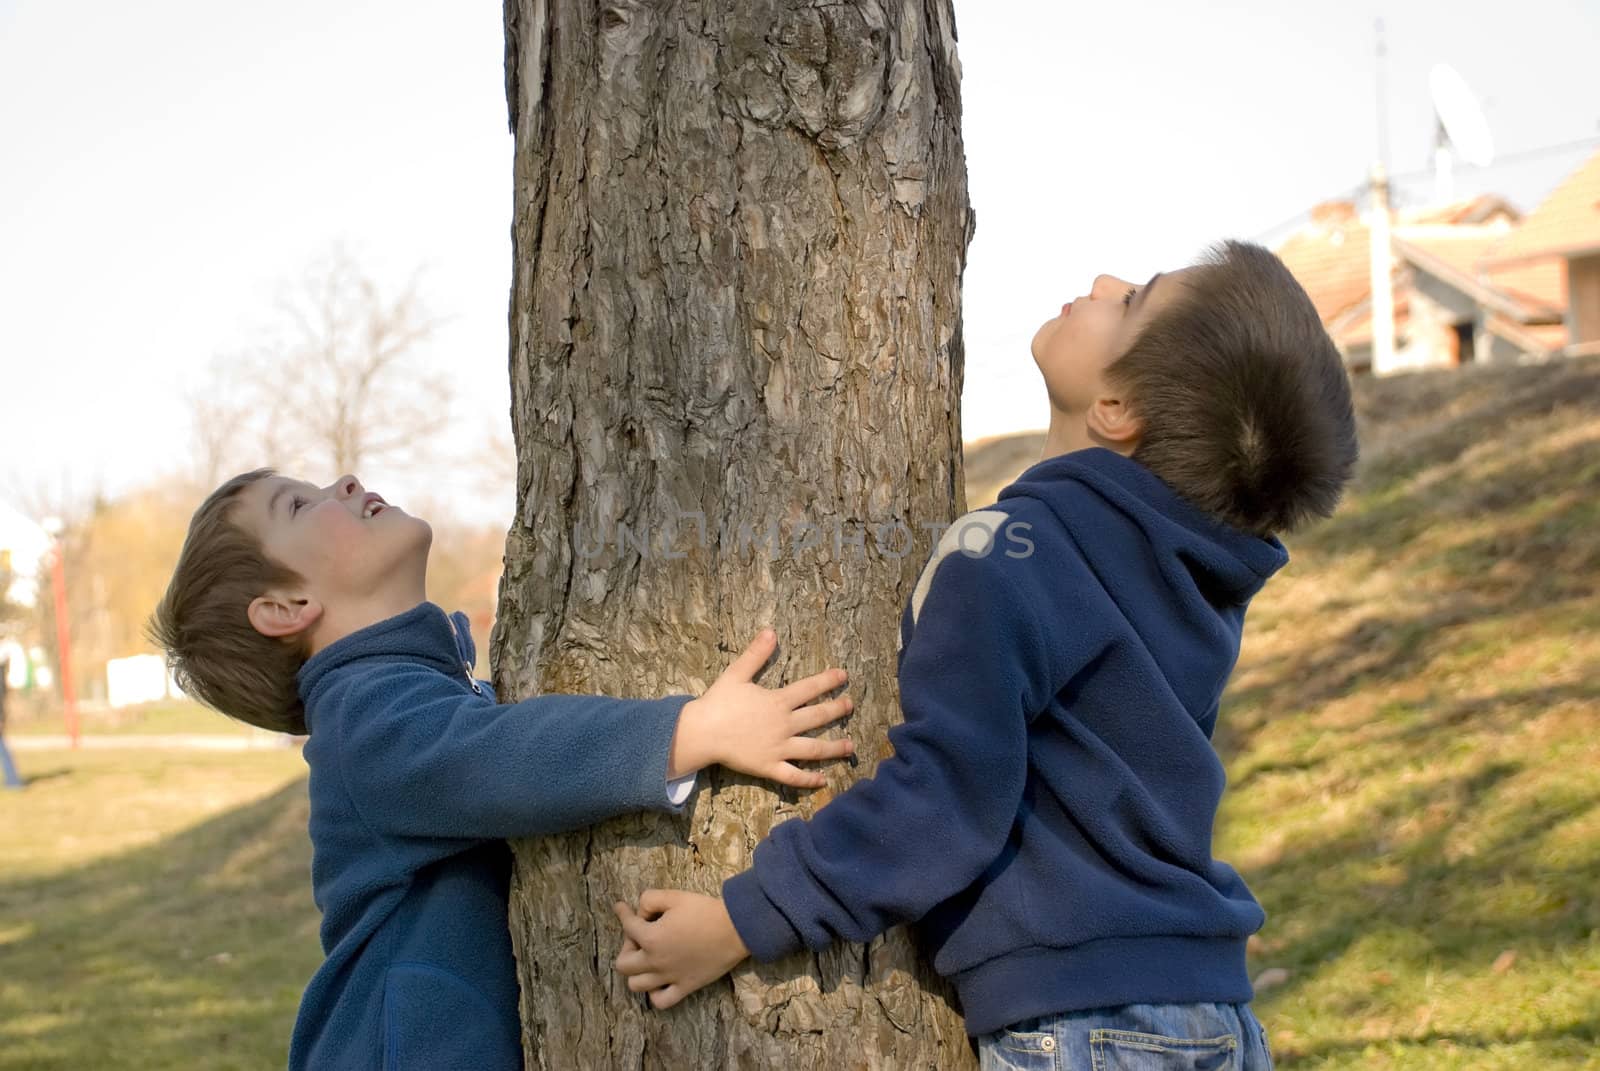 boys hugging a tree by whitechild